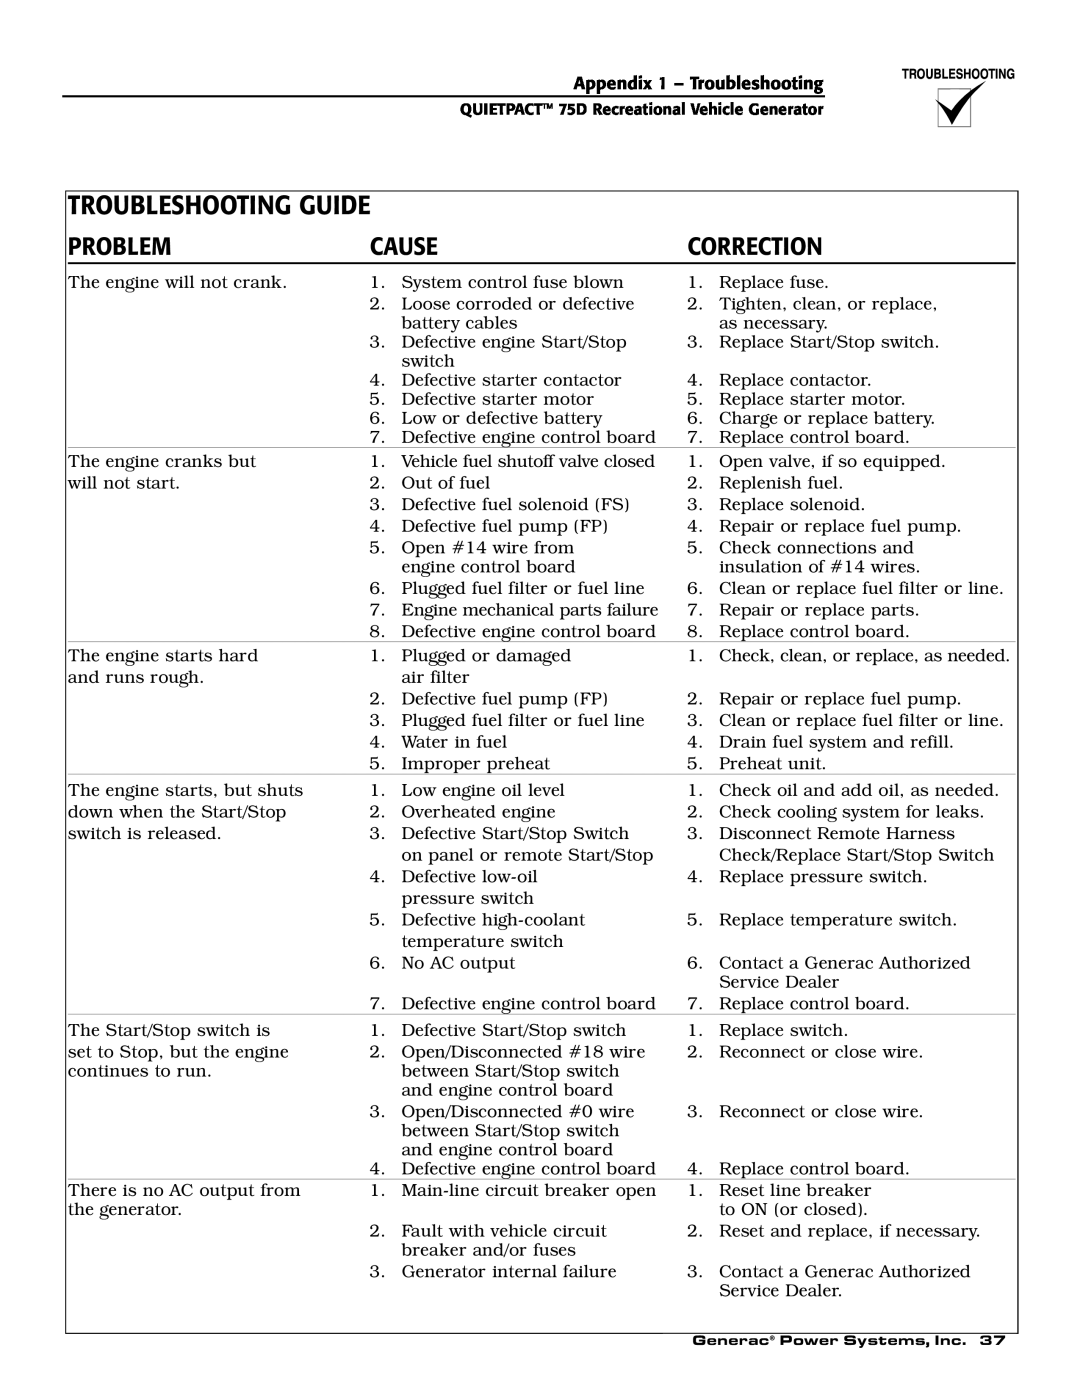 Guardian Technologies 004270-2 owner manual Troubleshooting Guide, Problem, Cause, Correction 